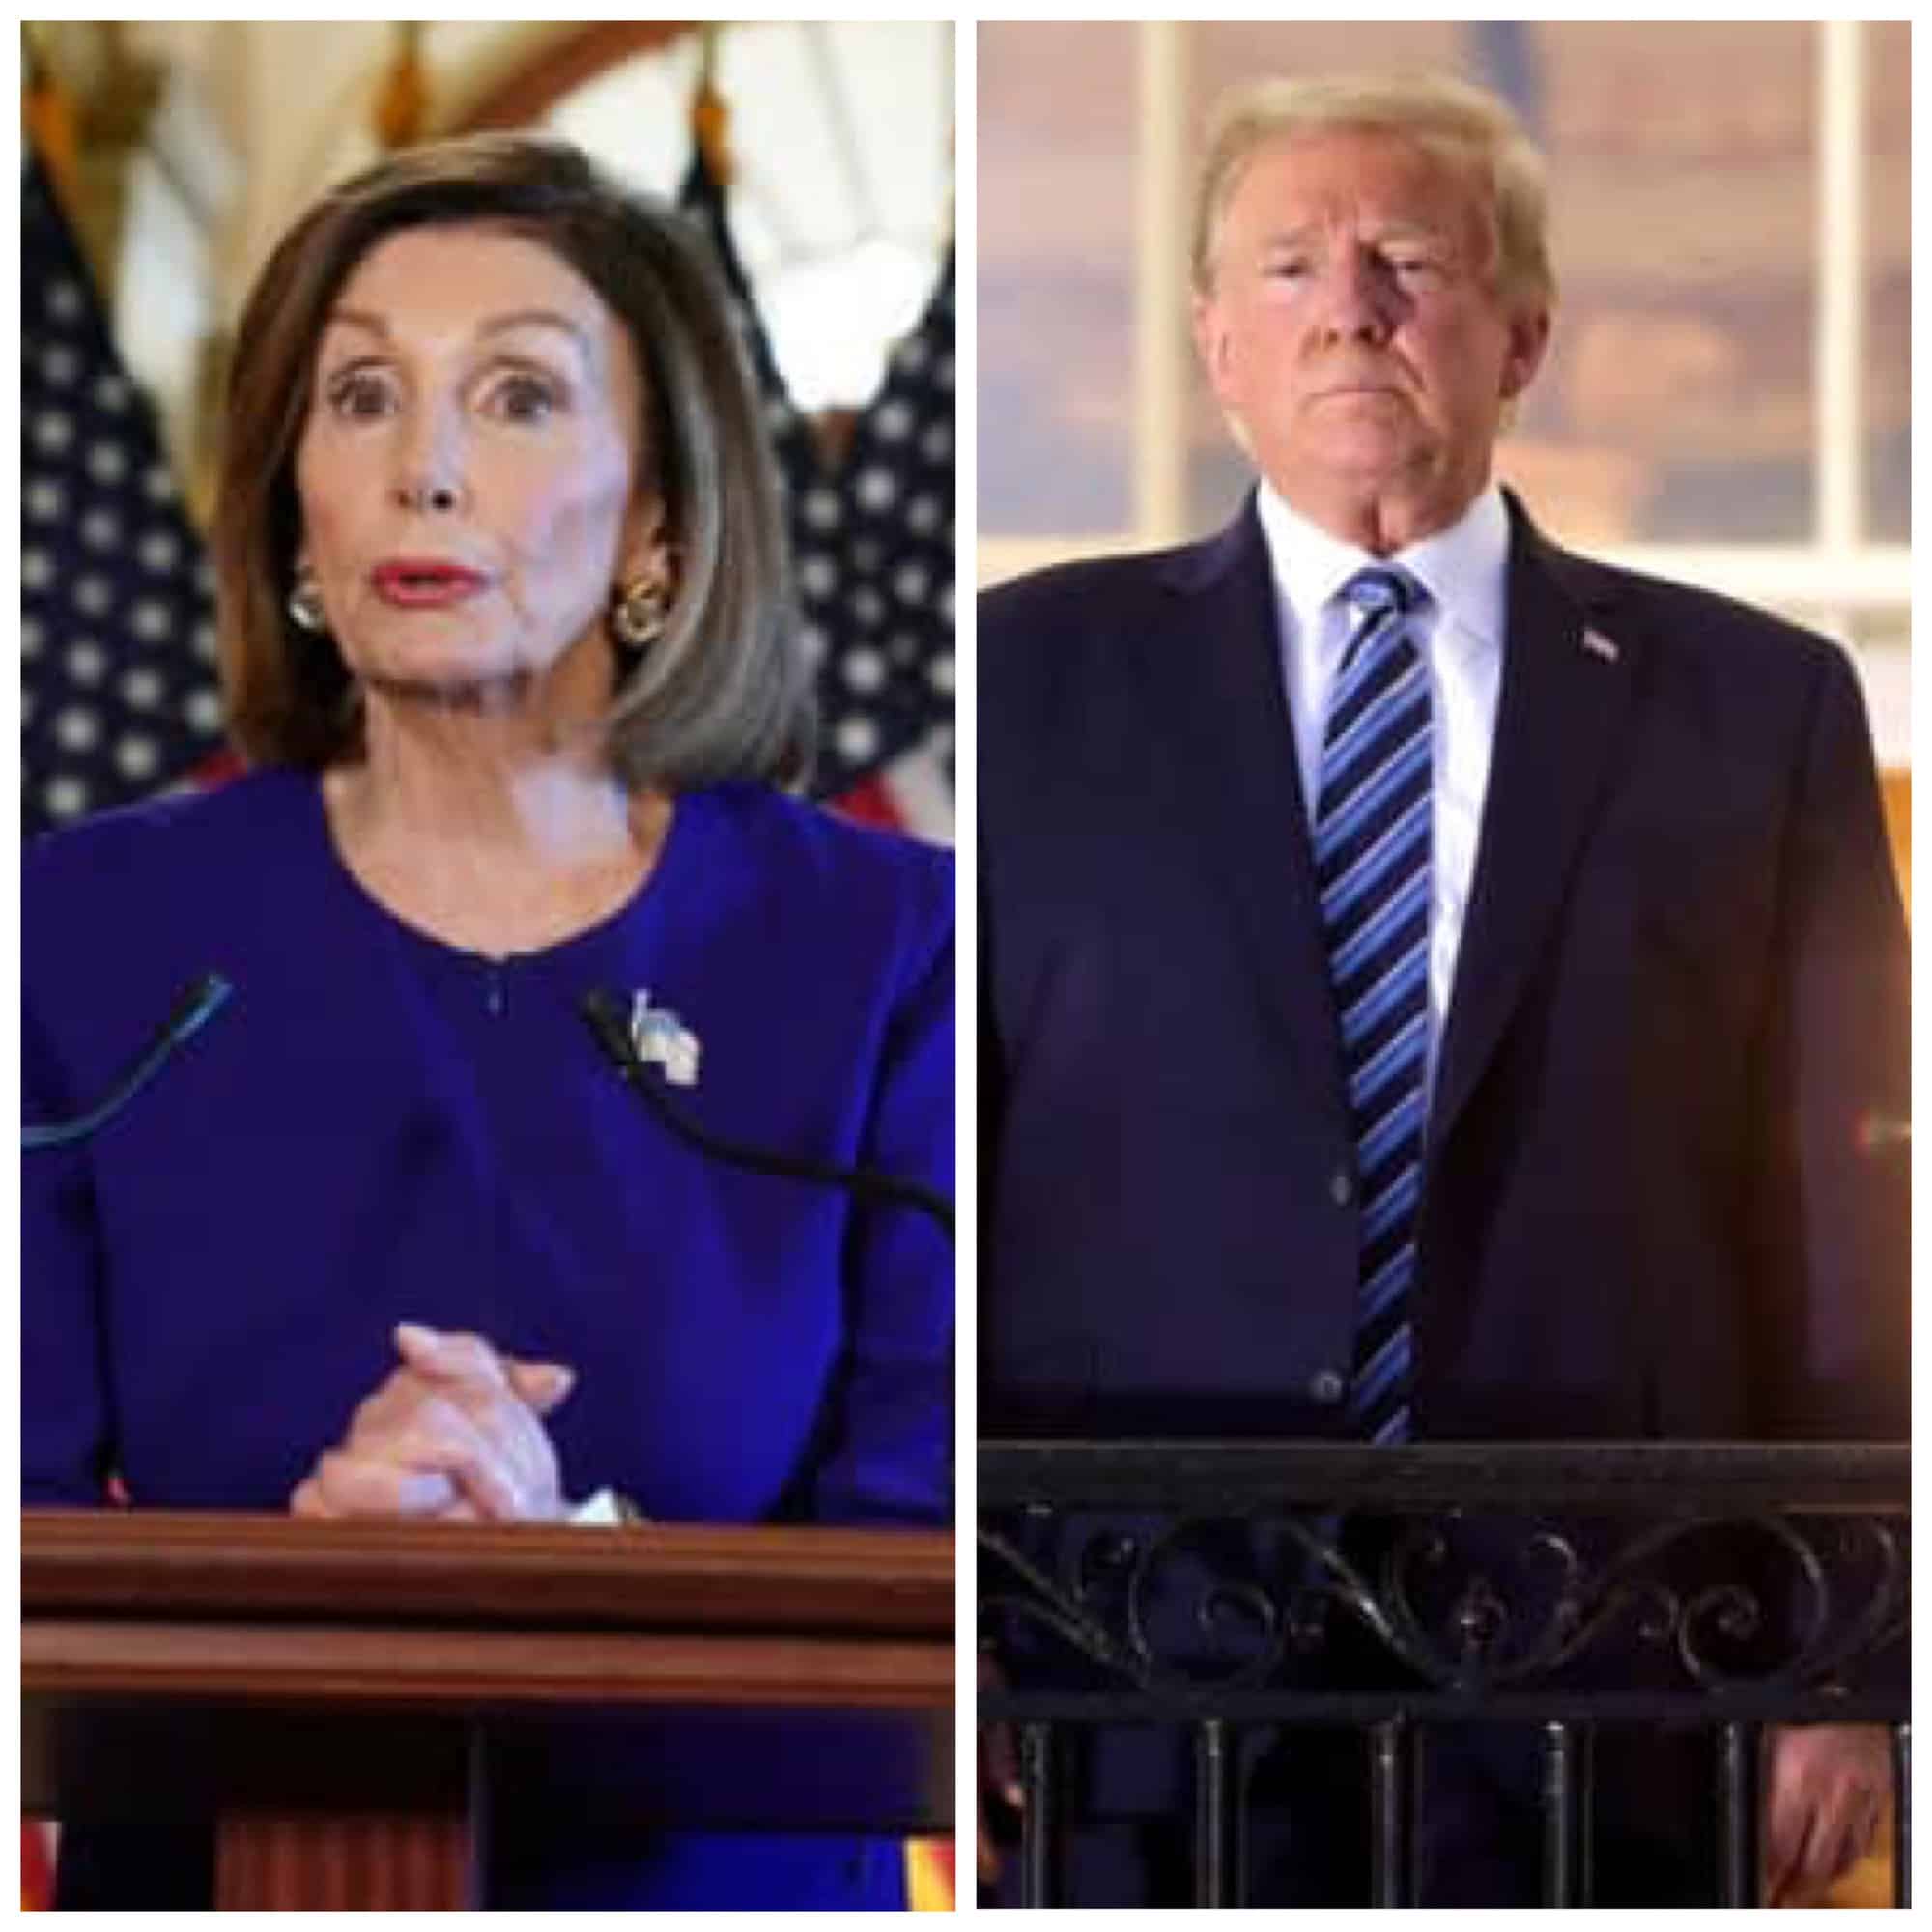 Nancy Pelosi Confirms Impeachment Article Will Be Delivered To The Senate On January 25th—Making Way For Trump’s Impeachment Trial